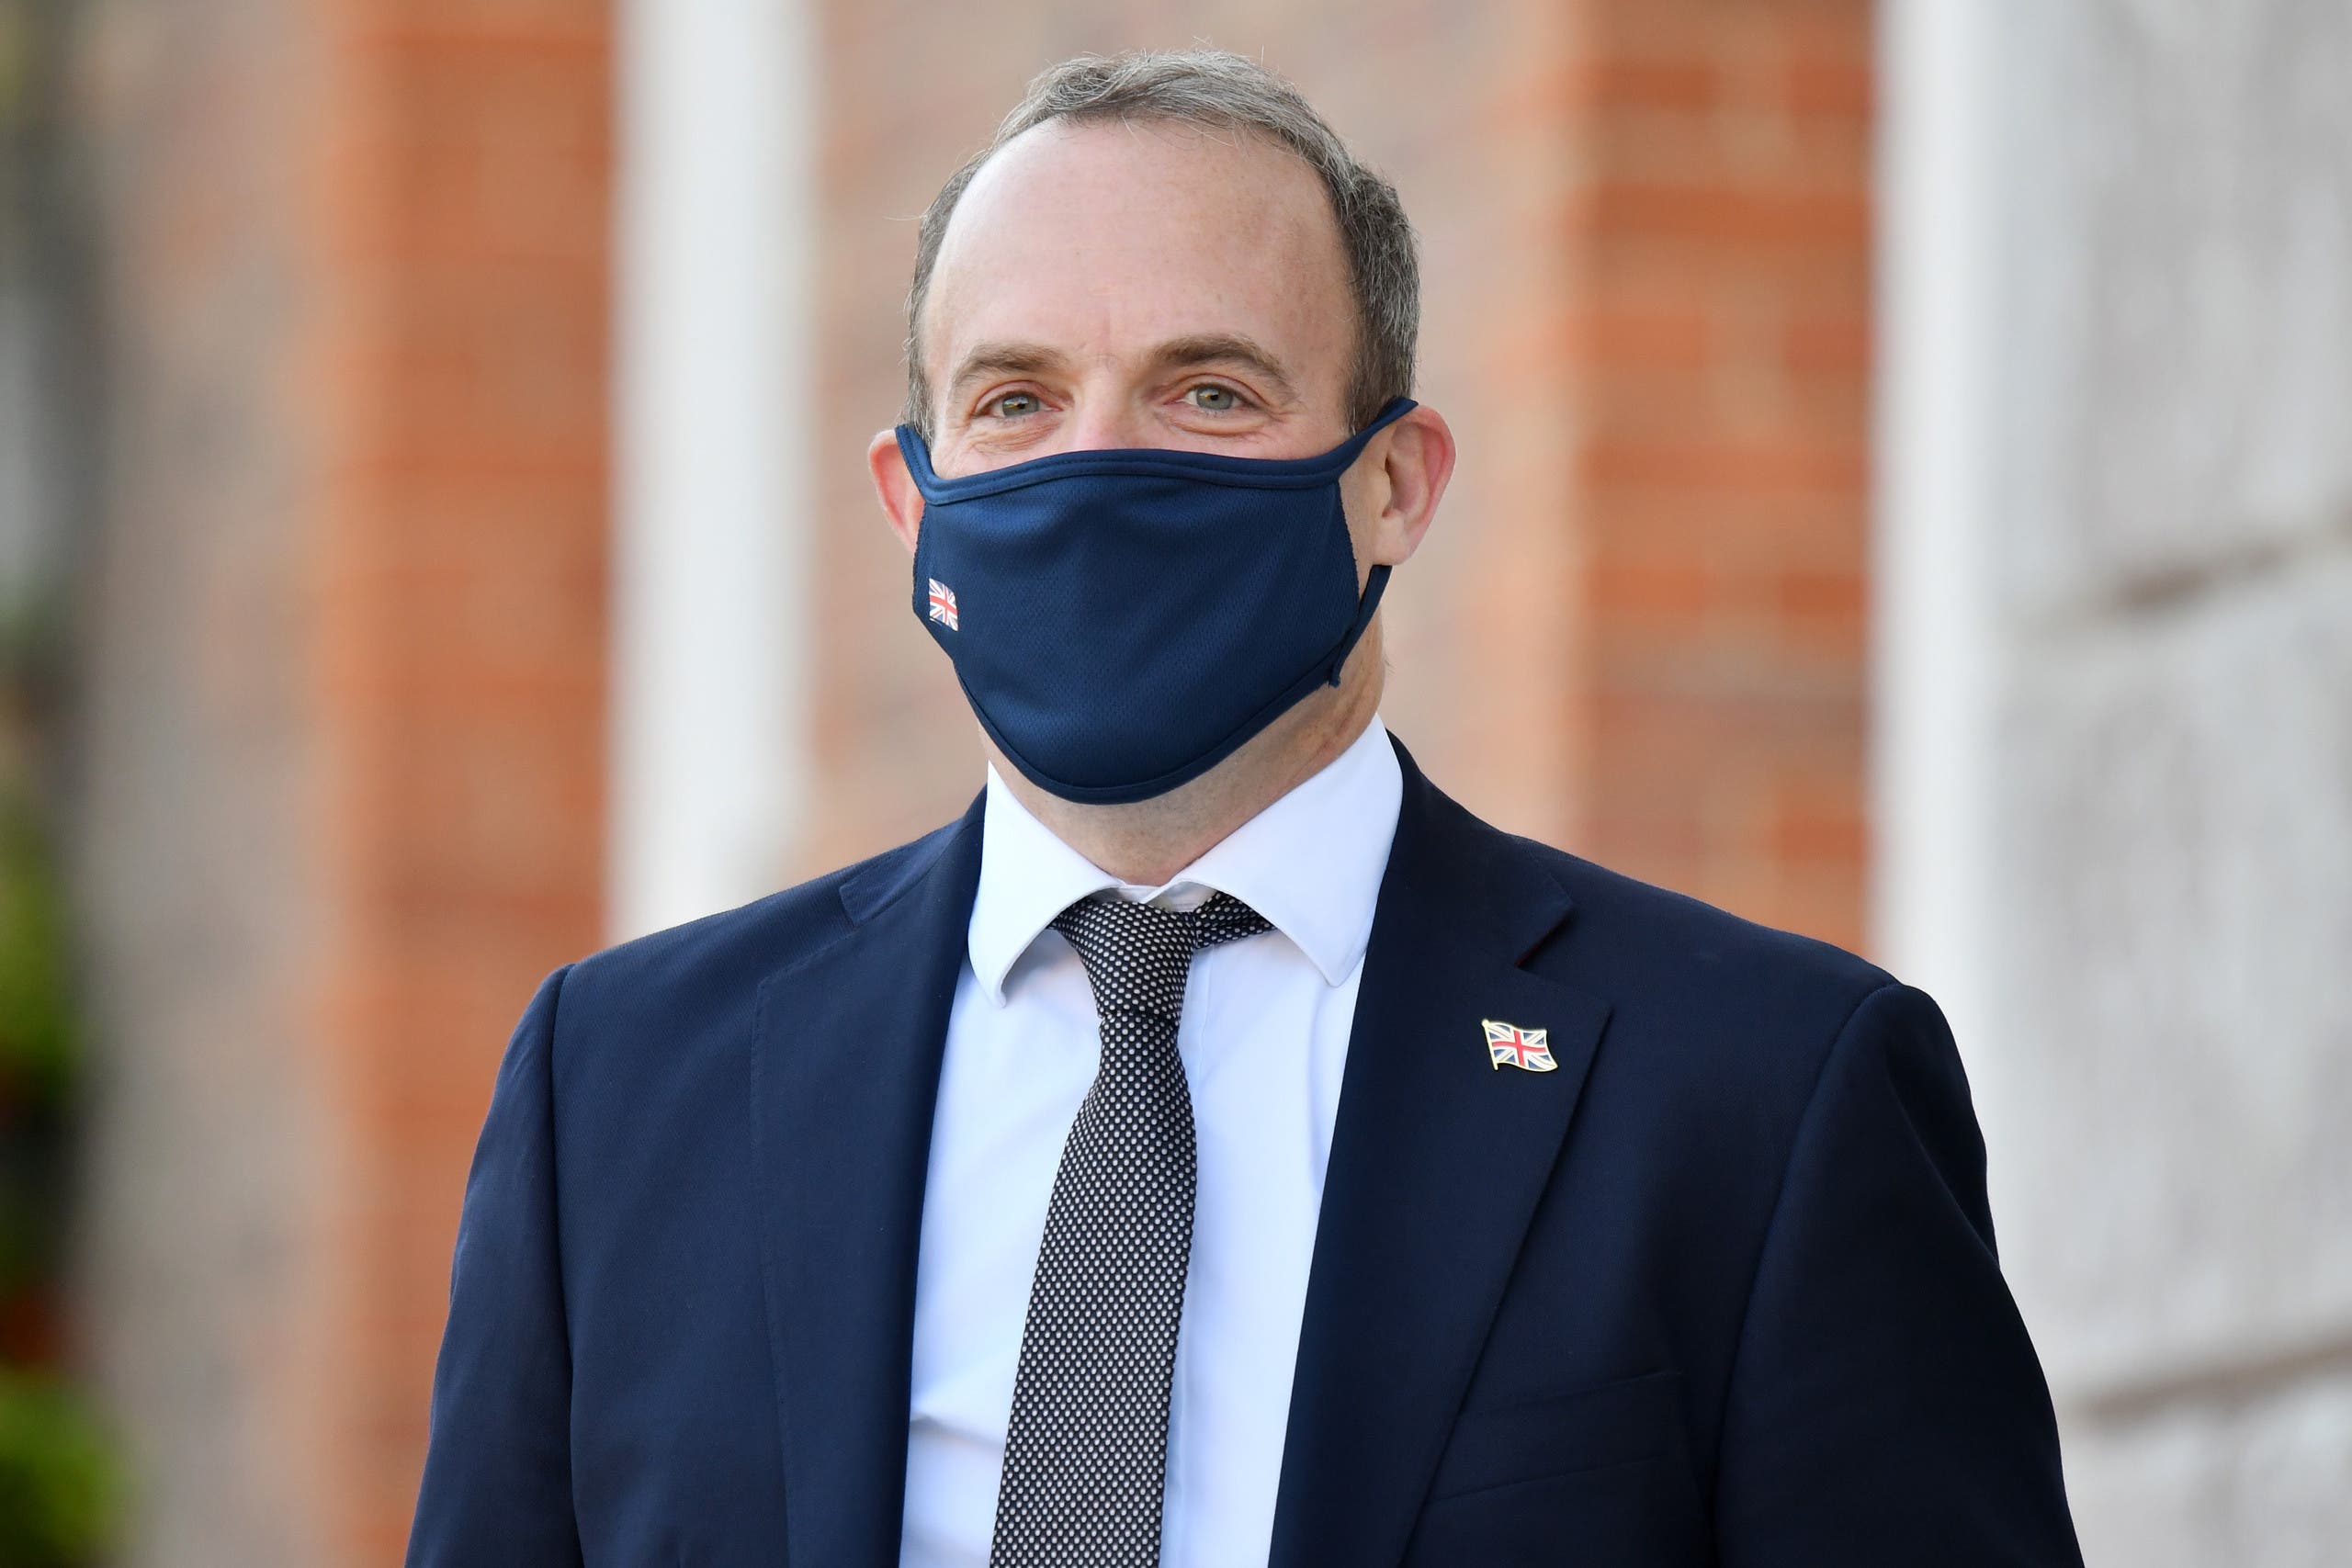 Britain's Foreign Secretary Dominic Raab wearing a protective face mask, waits to greet E3 foreign ministers at Chevening House, Sevenoaks, south of London, on September 10, 2020. The E3 foreign ministers met at the Foreign Secretary's country residence Chevening House.